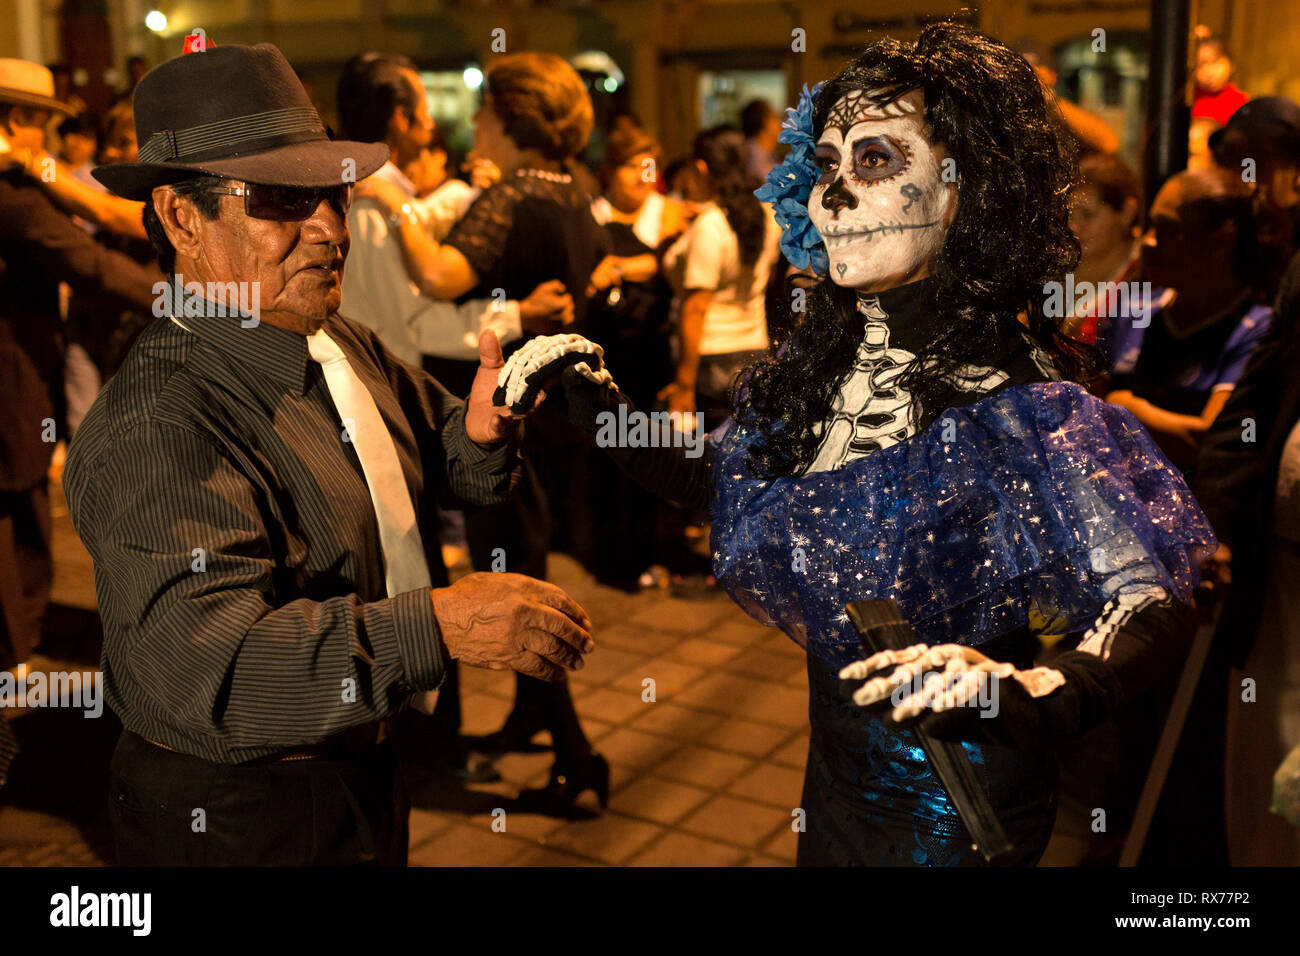 Some of the attendees come disguised as the dead to the dance held in the city square on the occasion of the celebration of the Day of the Dead. Stock Photo